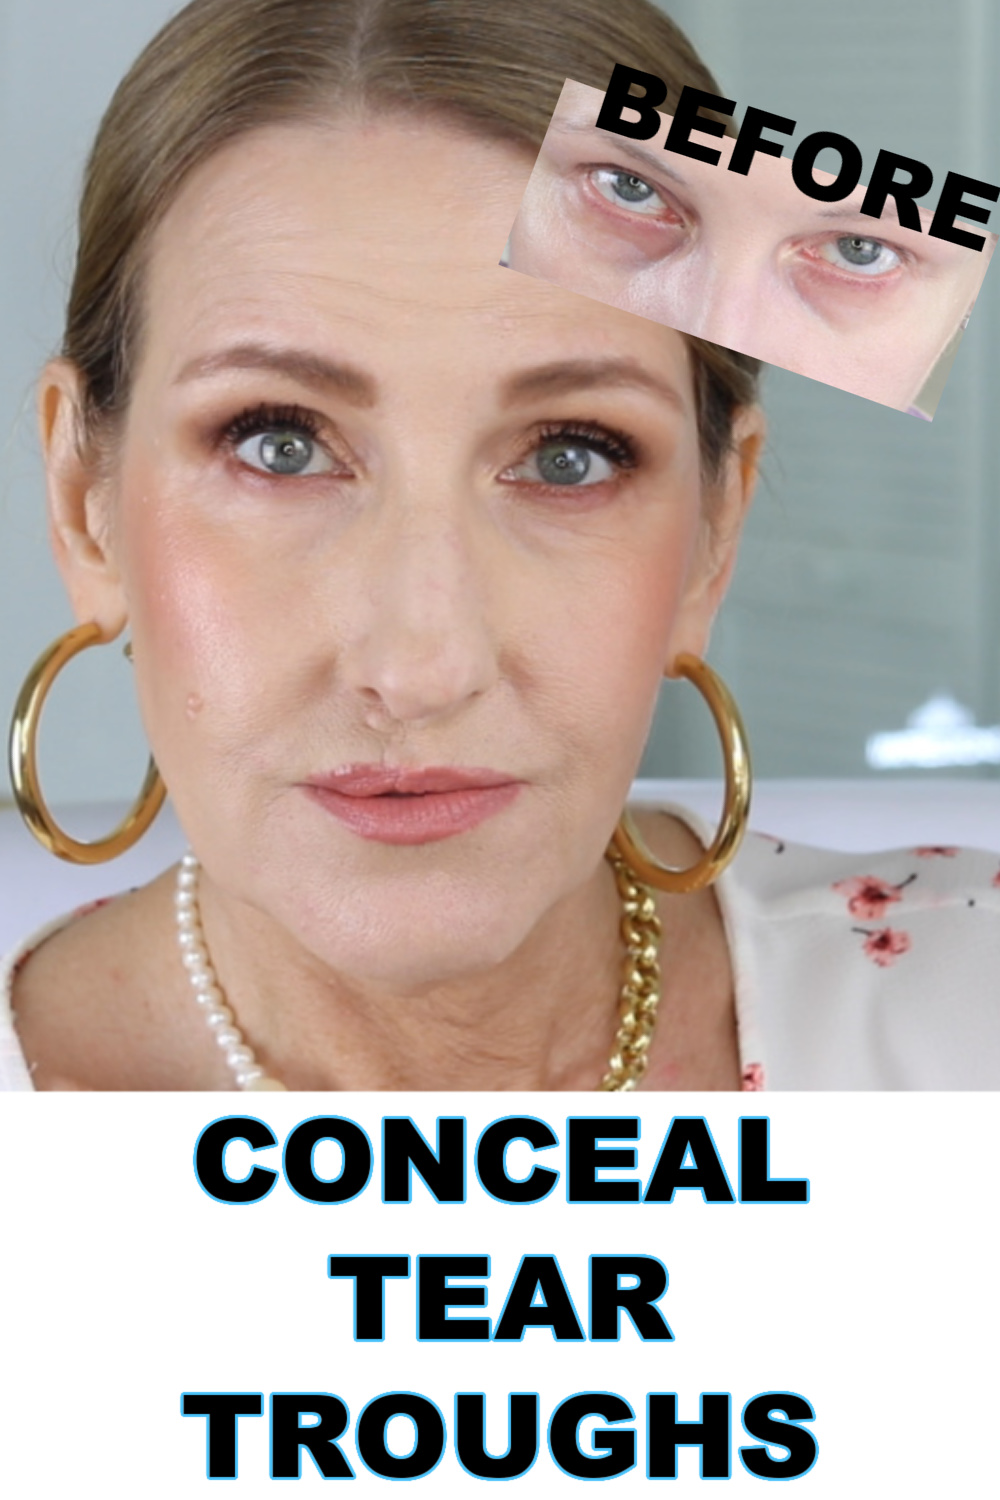 HOW TO CONCEAL TEAR TROUGHS